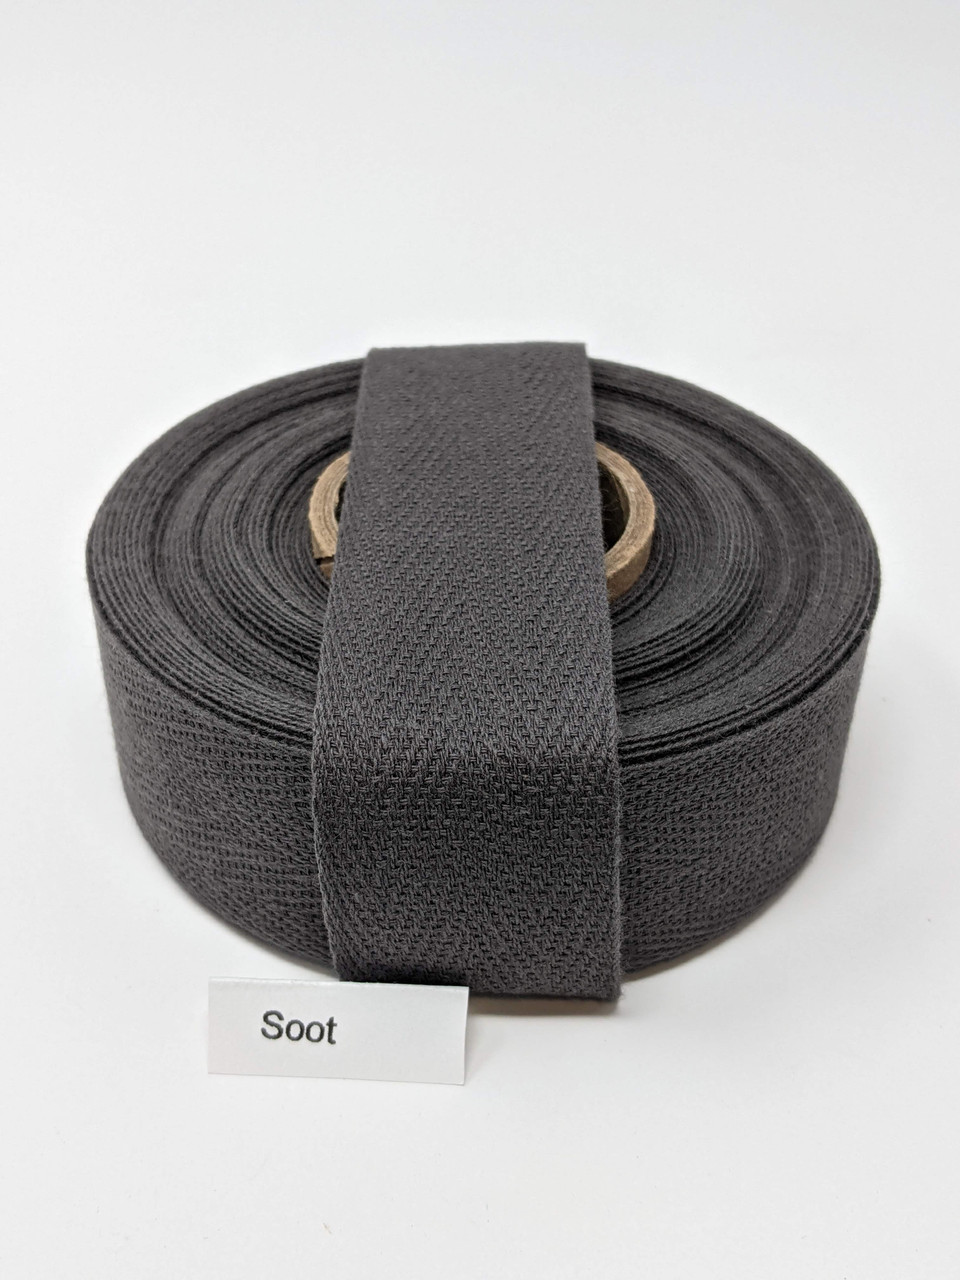 Polyester Twill Tape 2, 72 yard roll